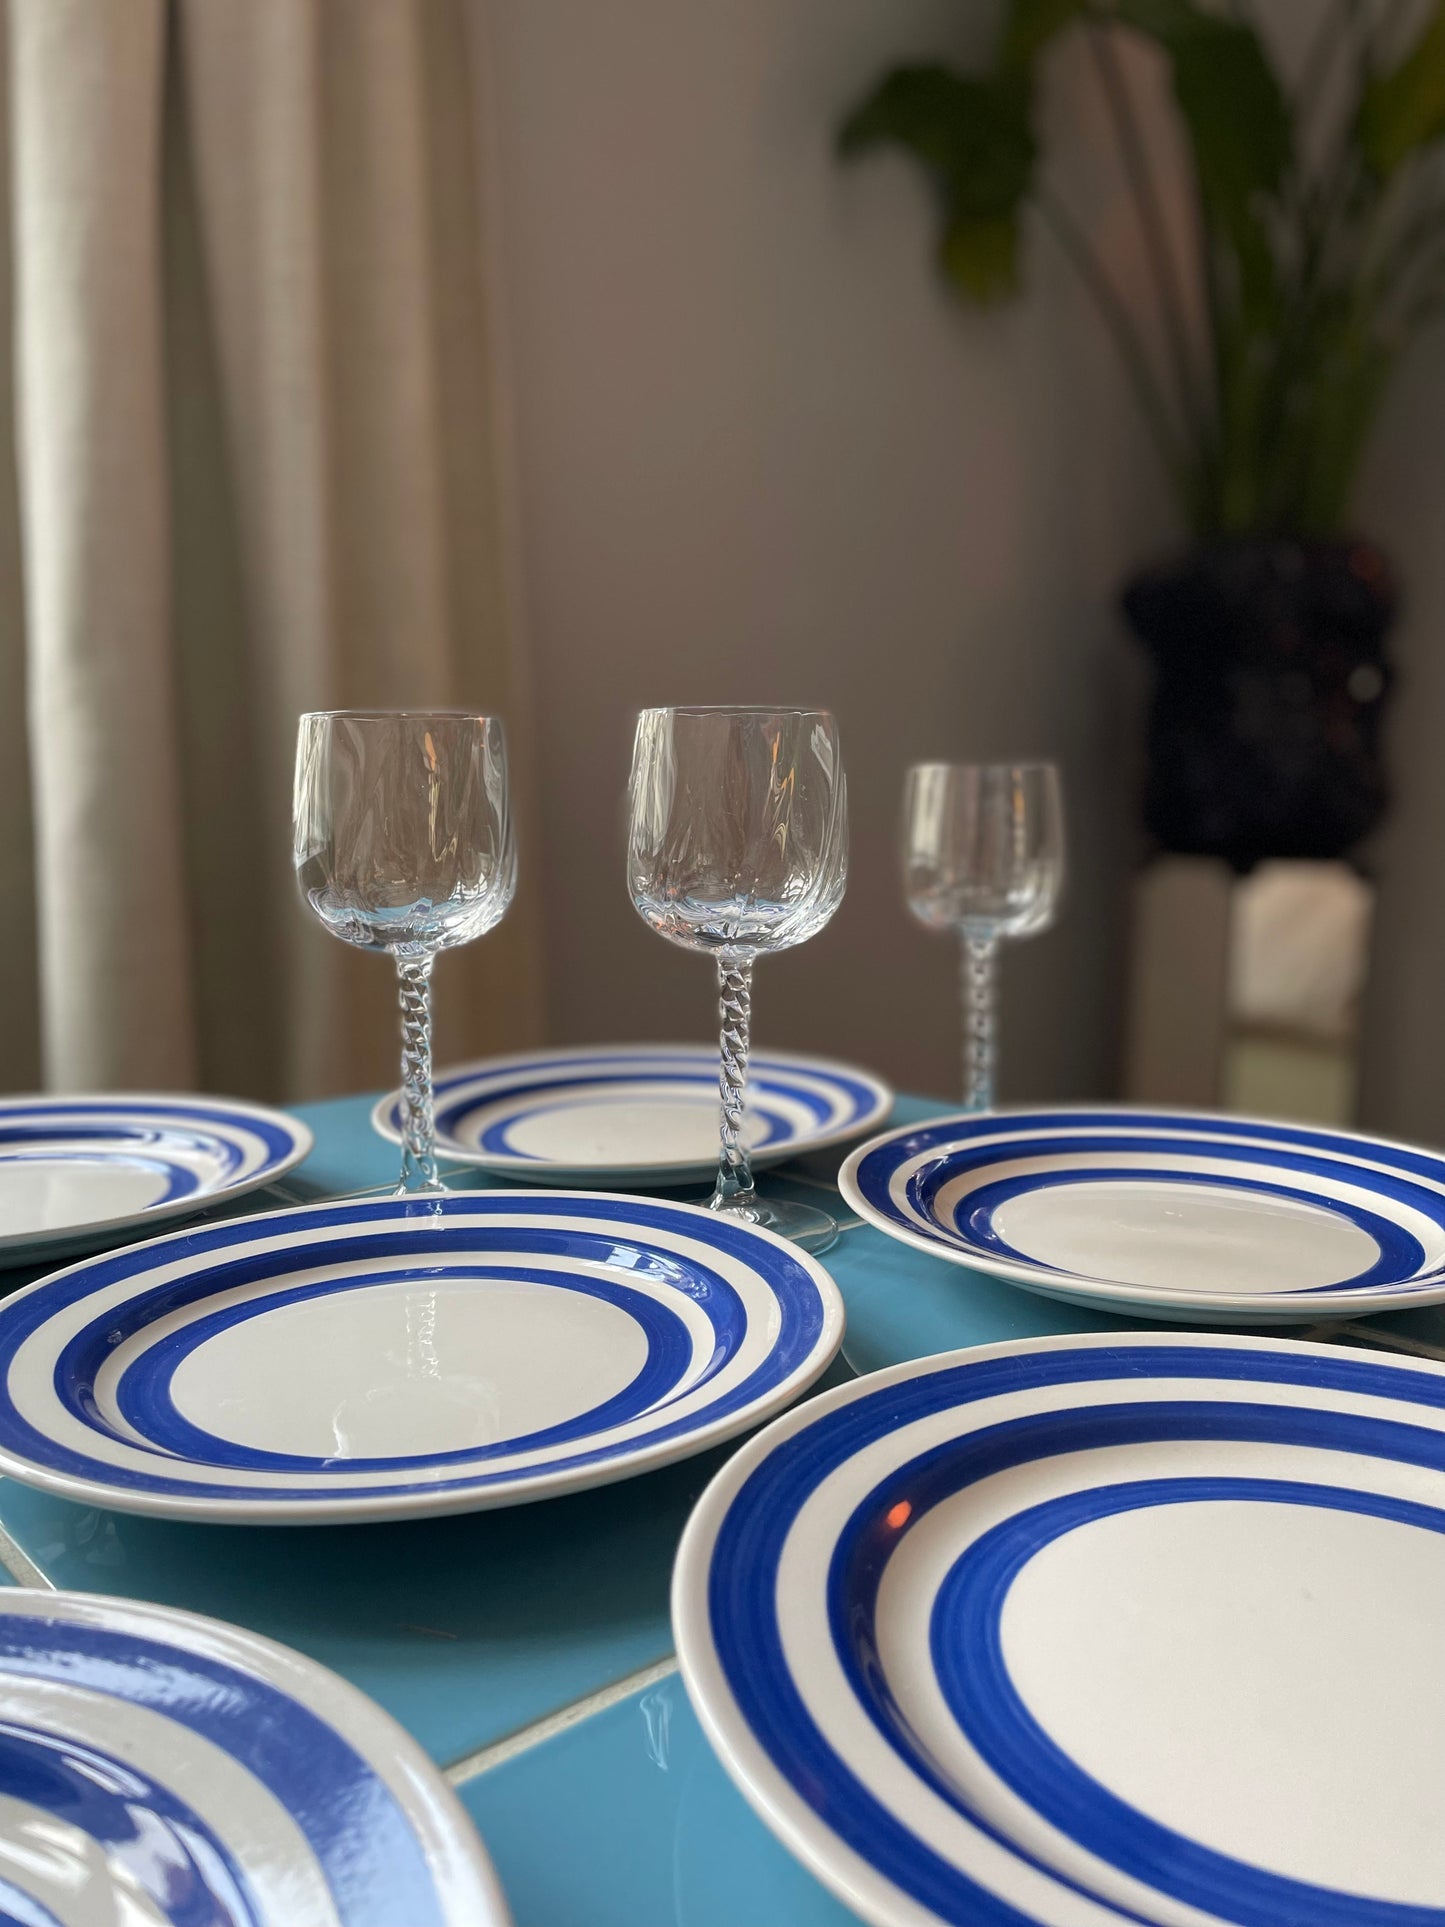 Lunch plates with blue stripes on the edge